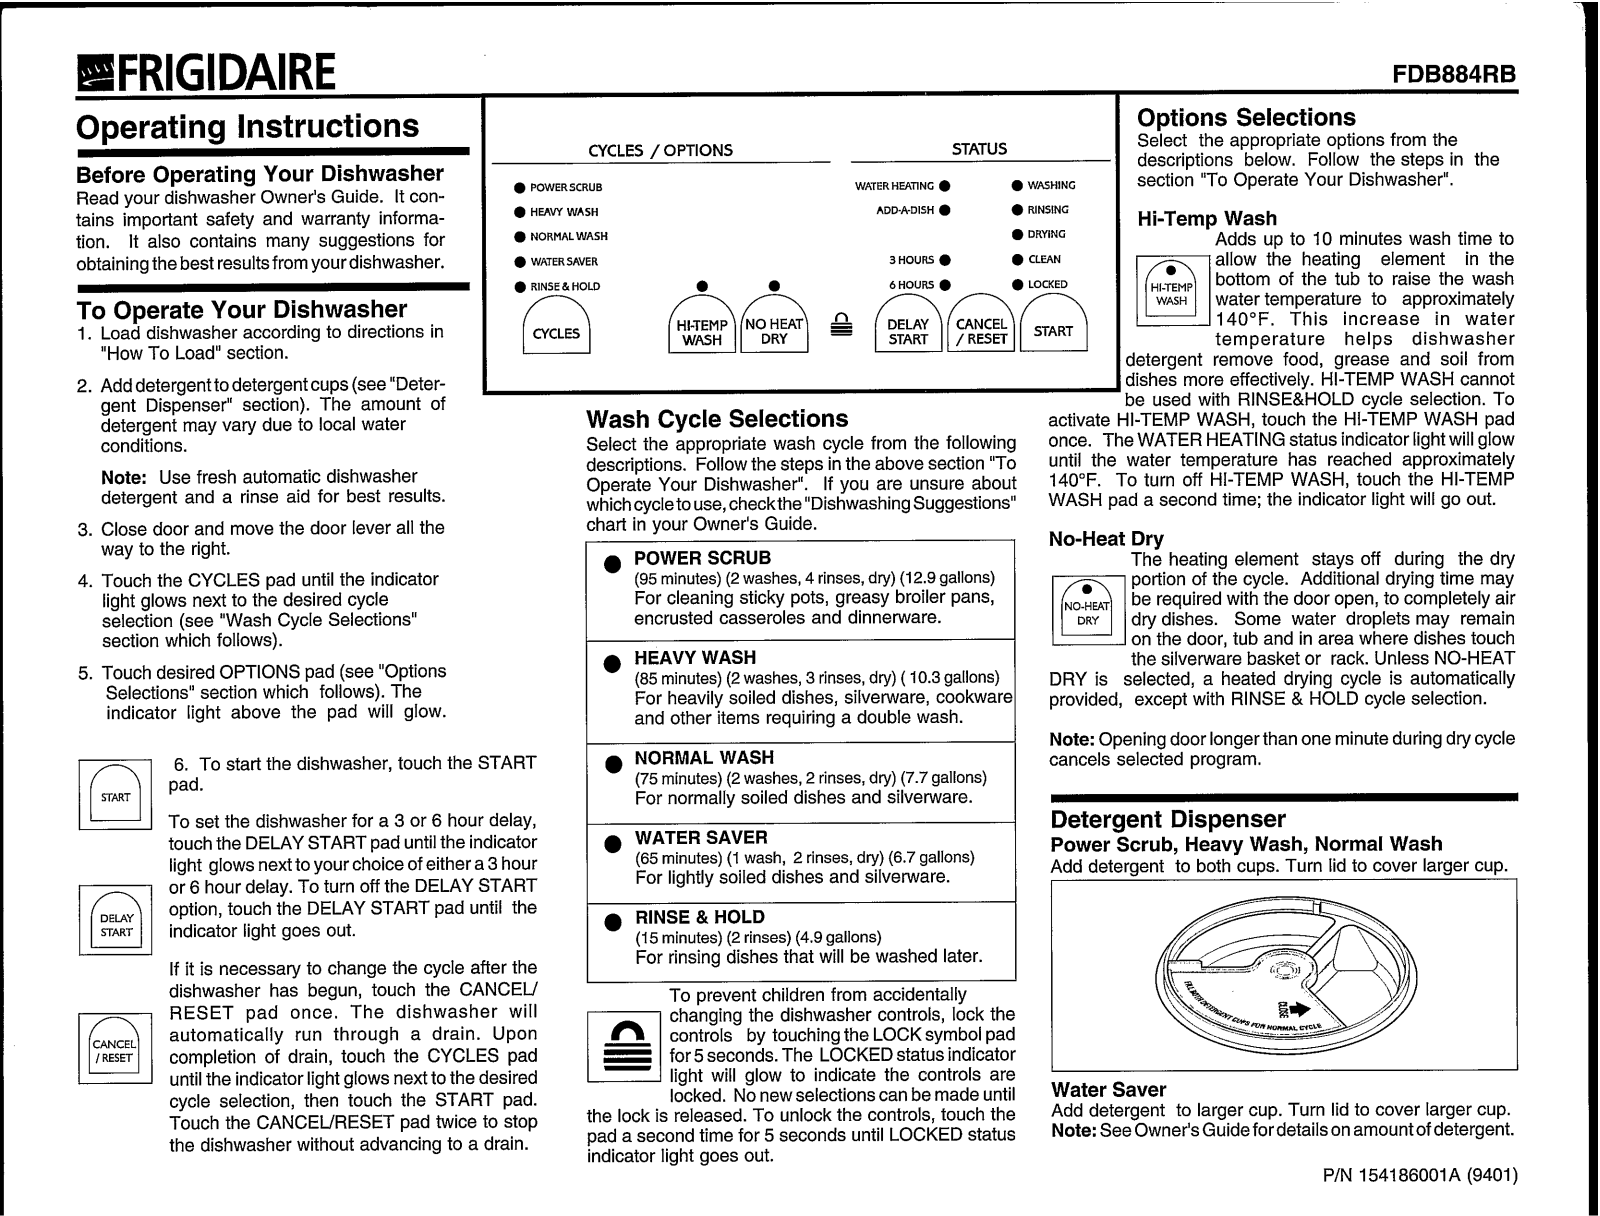 Frigidaire FDB884RB Owner's Guide